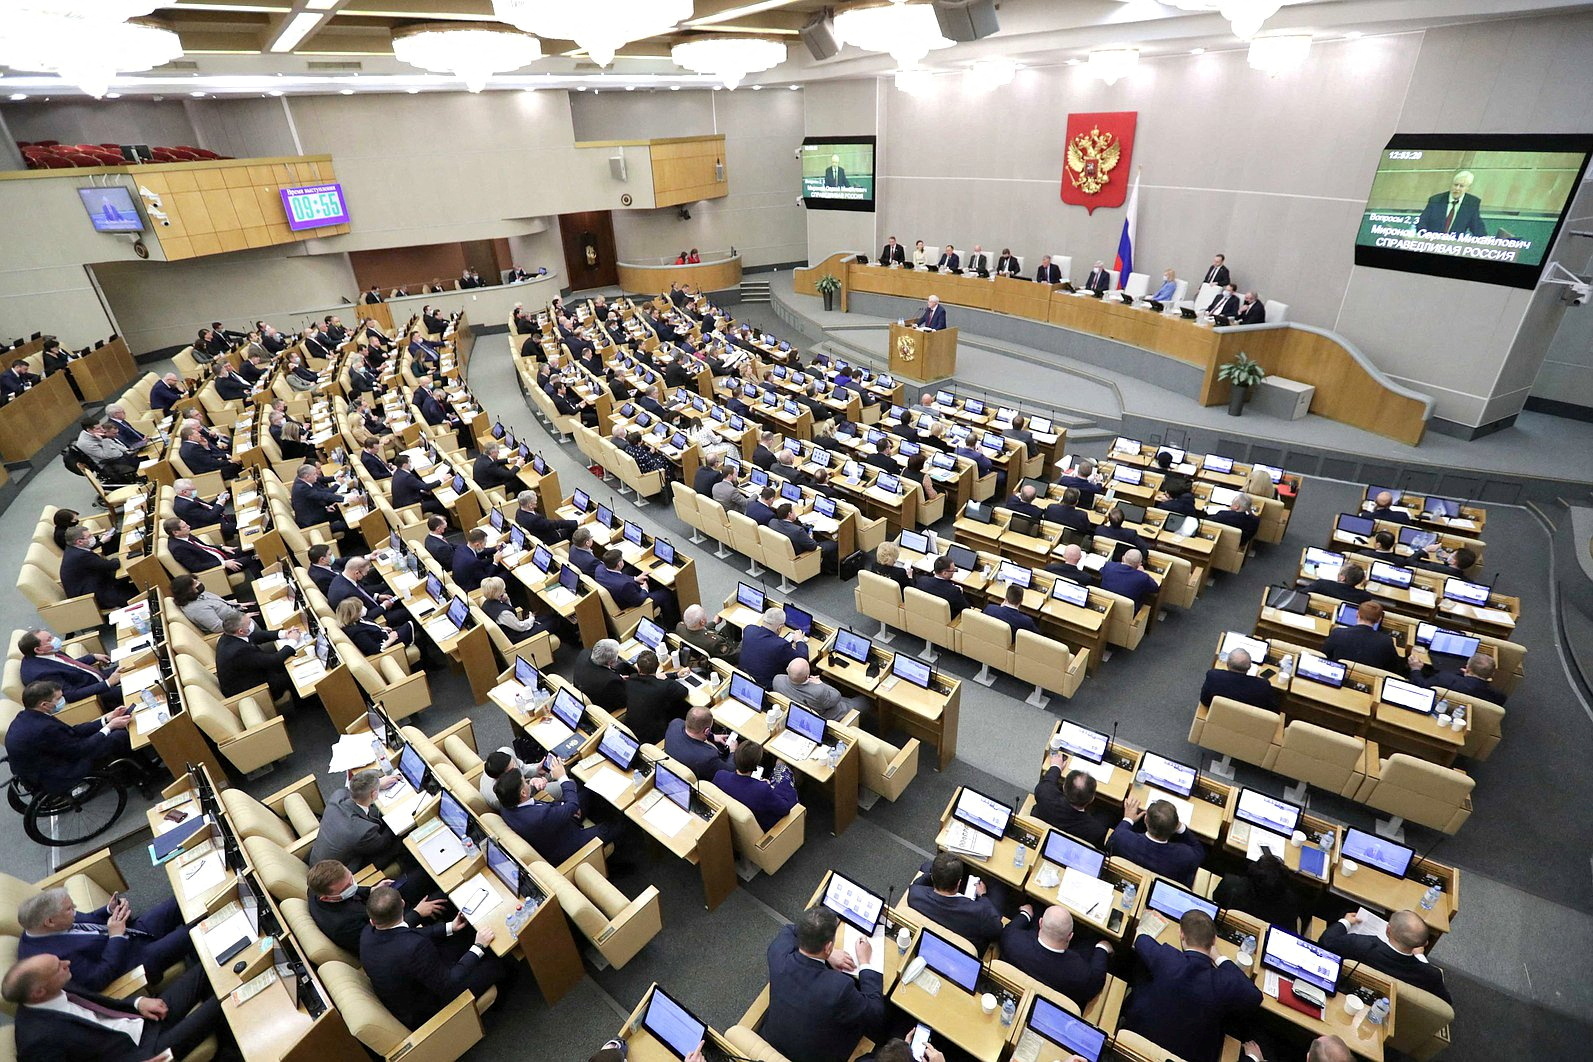 Russian lawmakers attend a session of the State Duma in Moscow, in this file photo from Feb. 22.